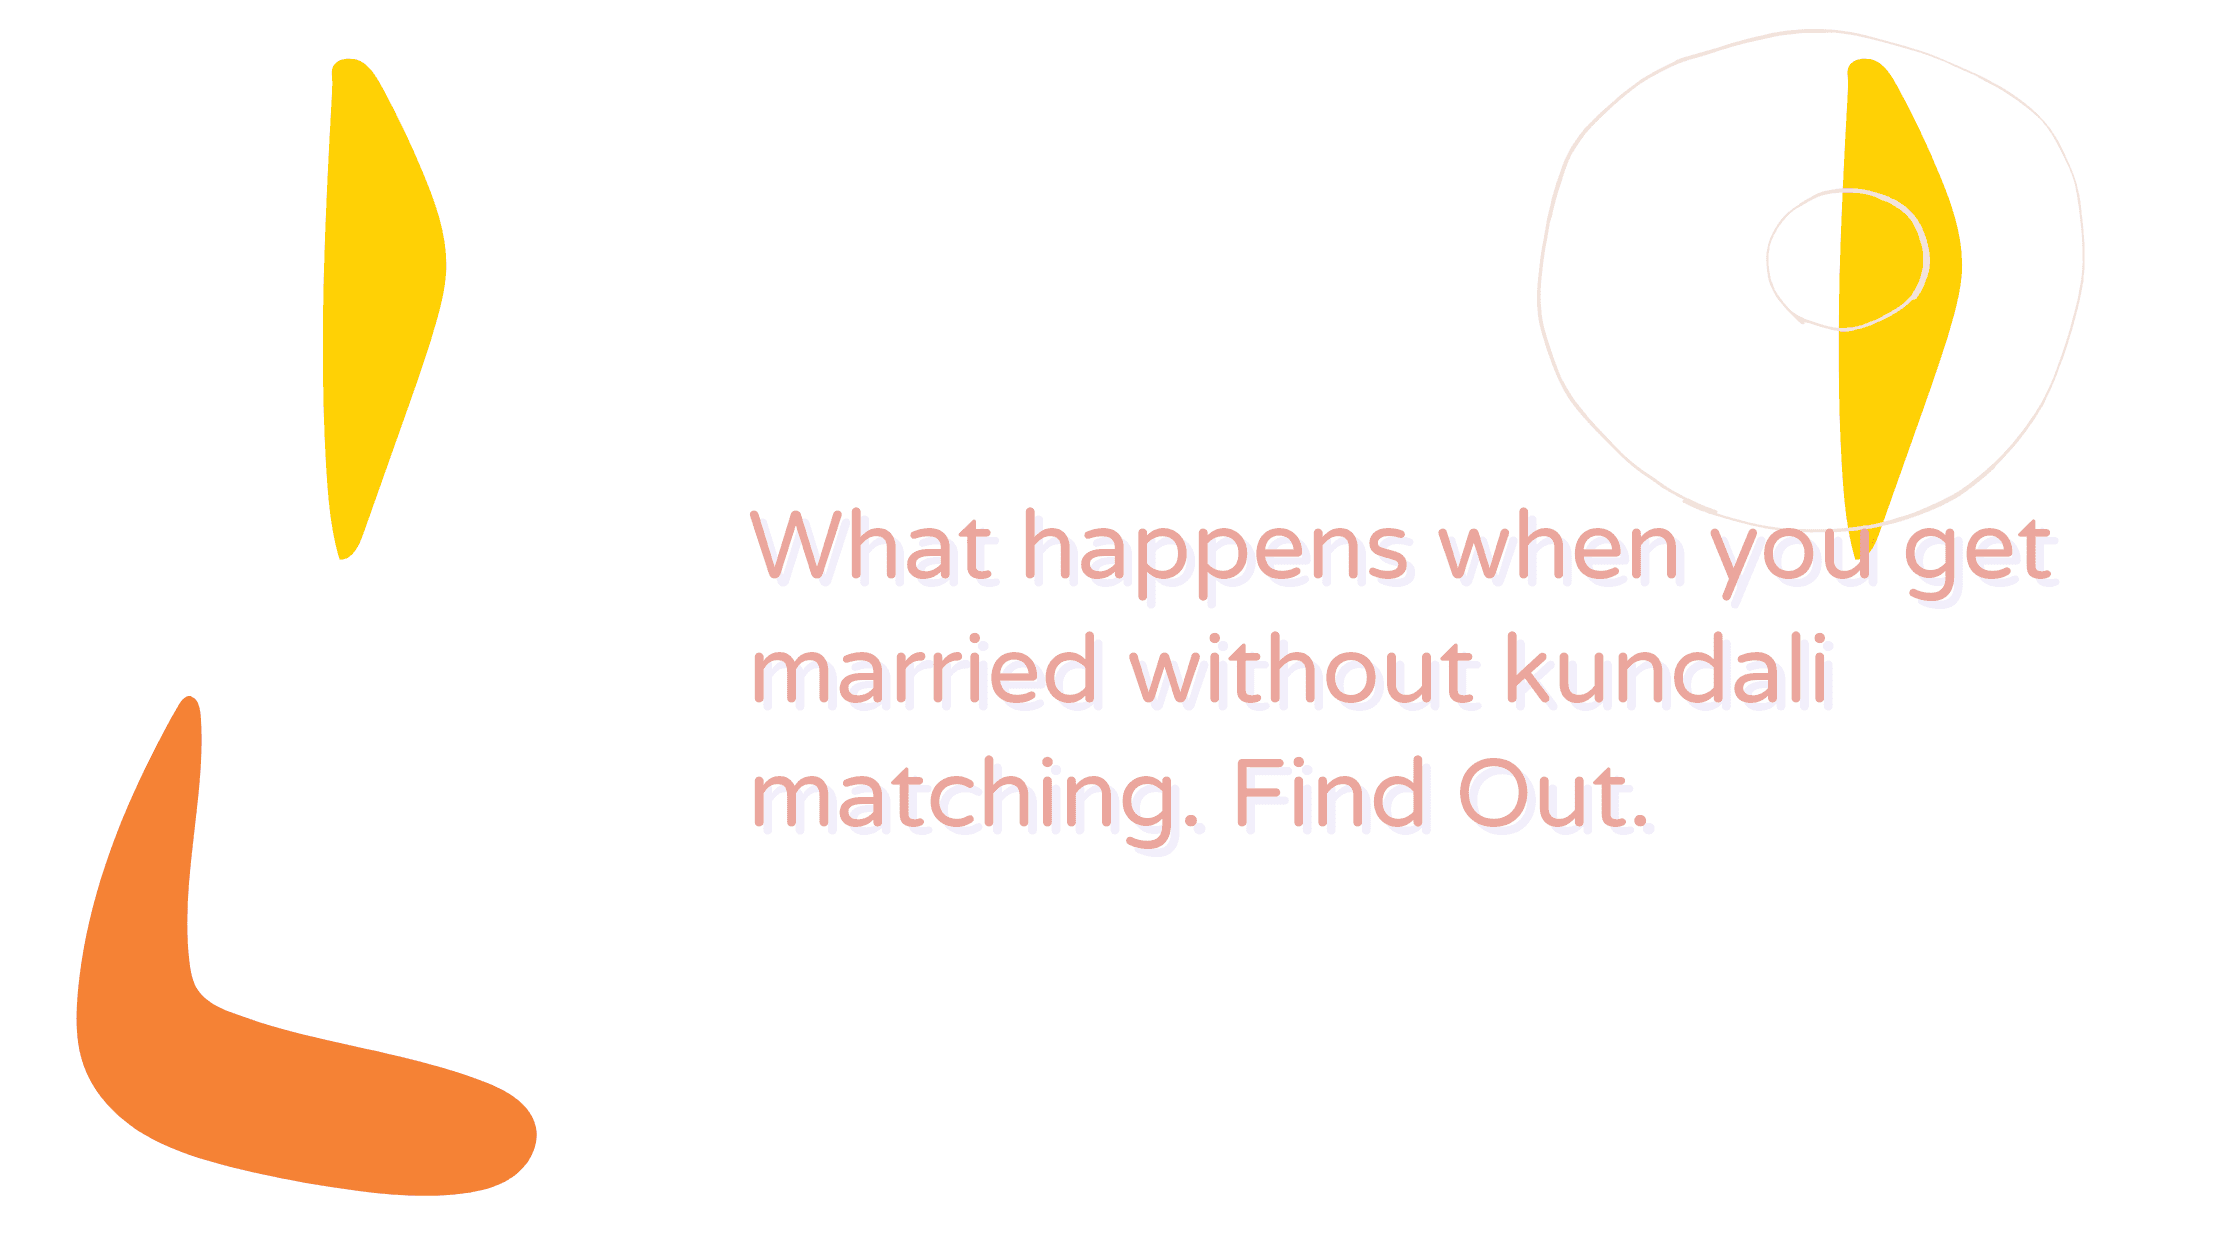 What Happens When I Get Married Even When Our Kundali Does Not Match?